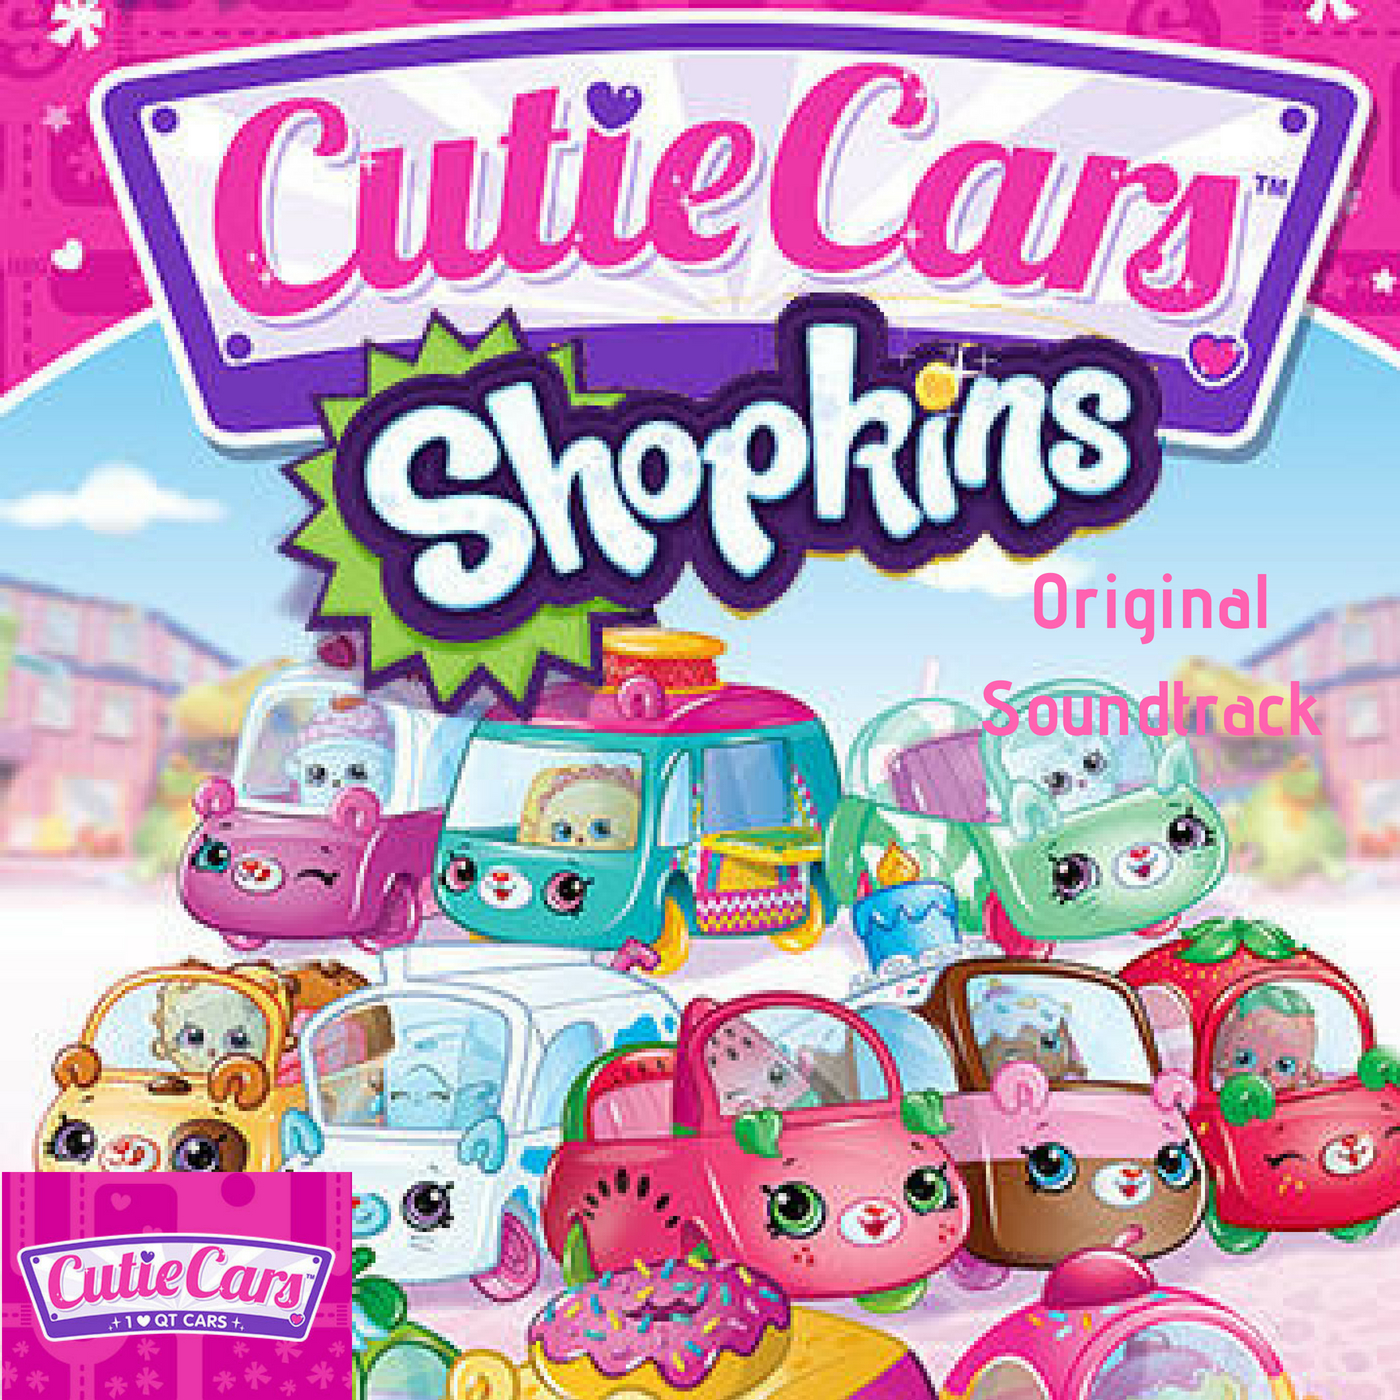 https://static.wikia.nocookie.net/shopkins-fan/images/3/39/Cutie_Cars_OST_Cover.jpg/revision/latest?cb=20180723134647